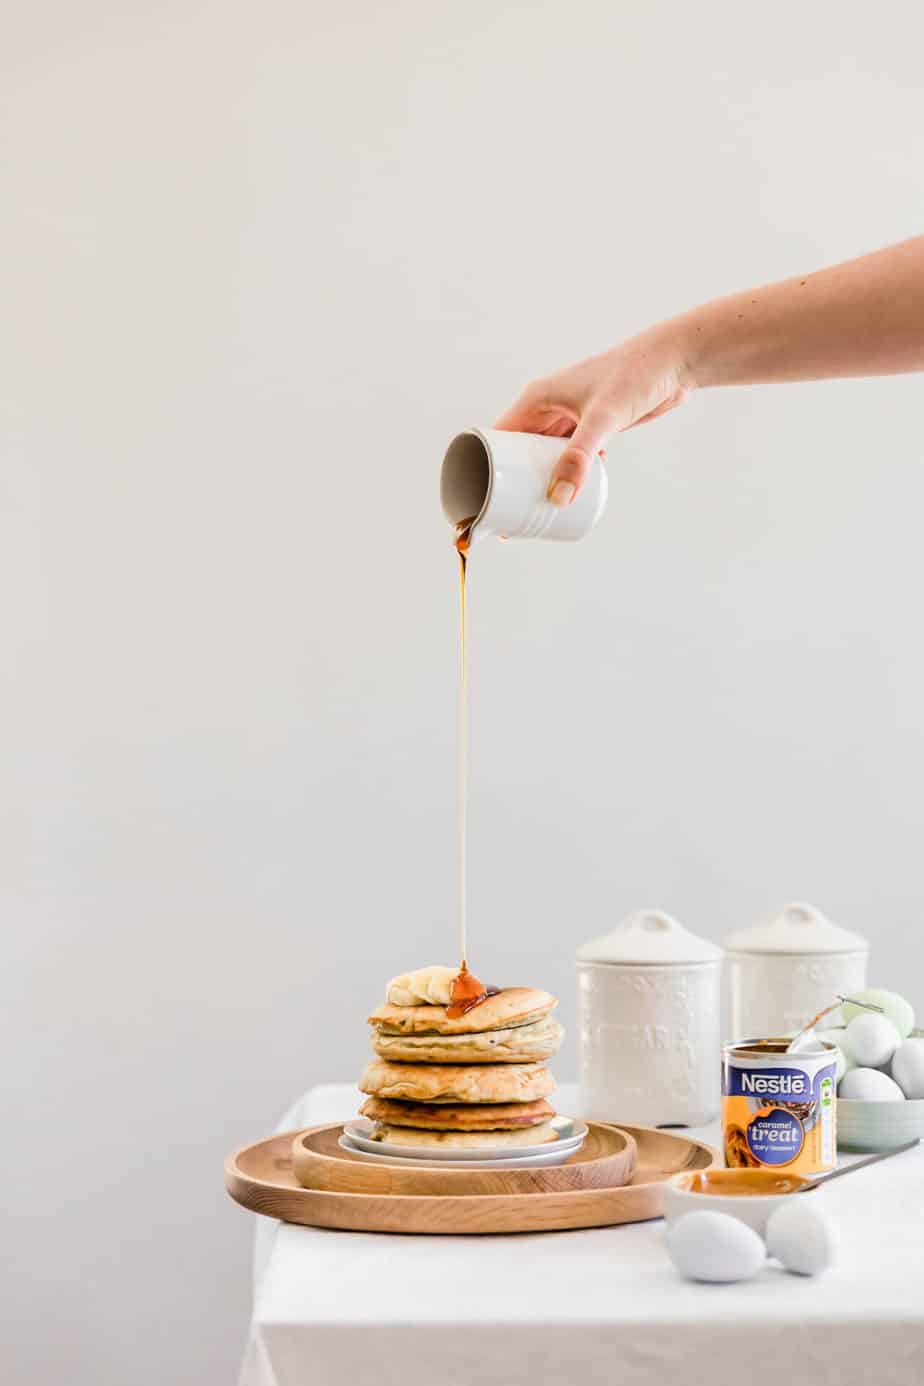 A jug pouring maple syrup over a stack of salted caramel pancakes with sliced bananas on top.